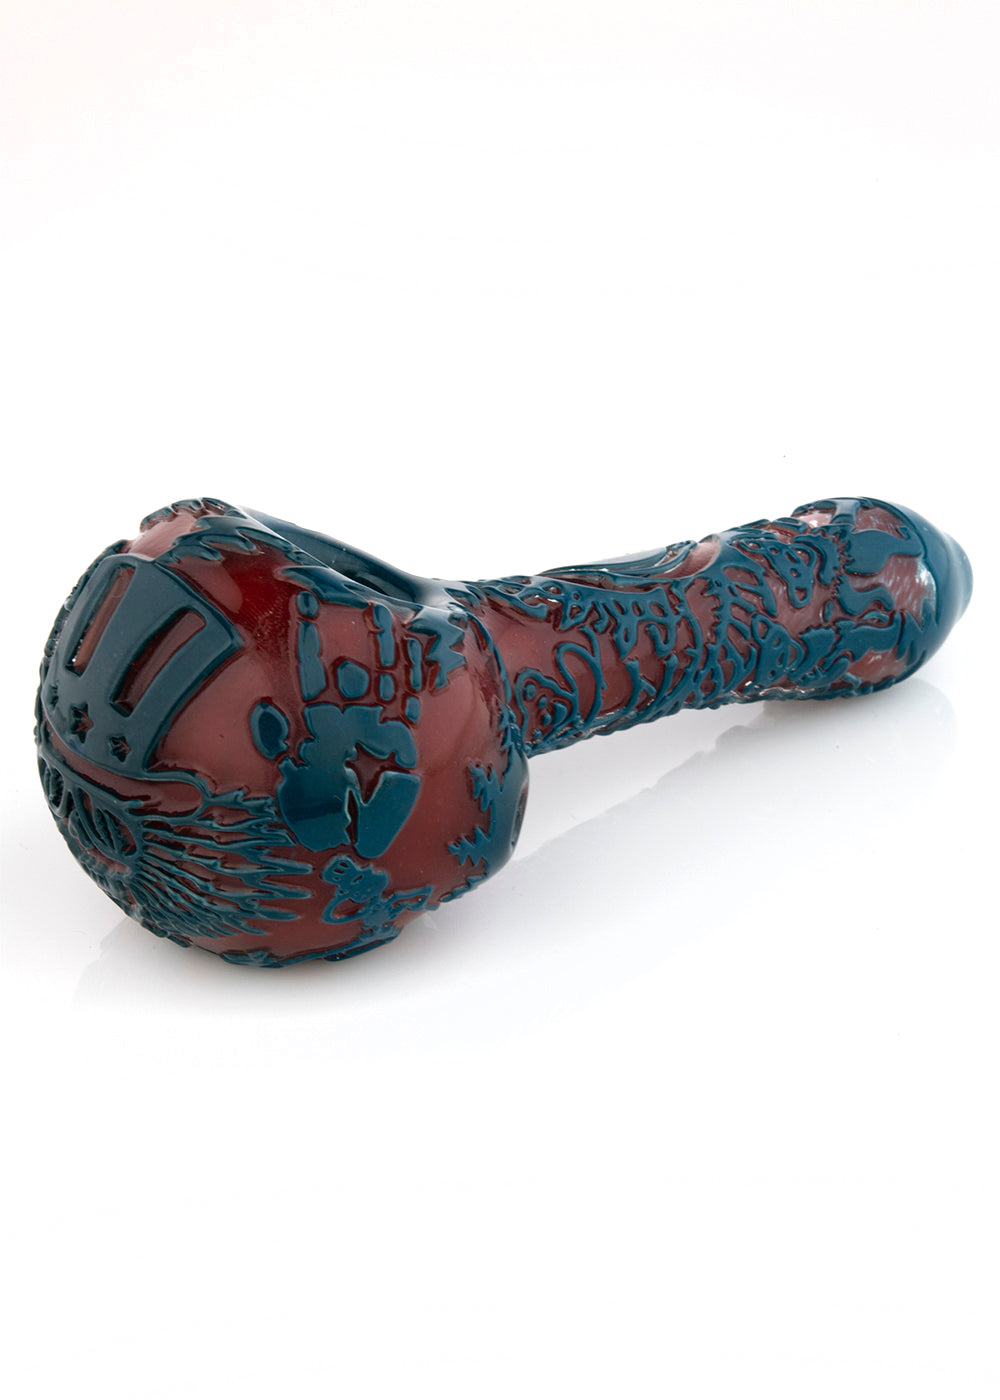 Grateful Dead Frit Over Frit Fire Polished Spoon #2 by Liberty 503